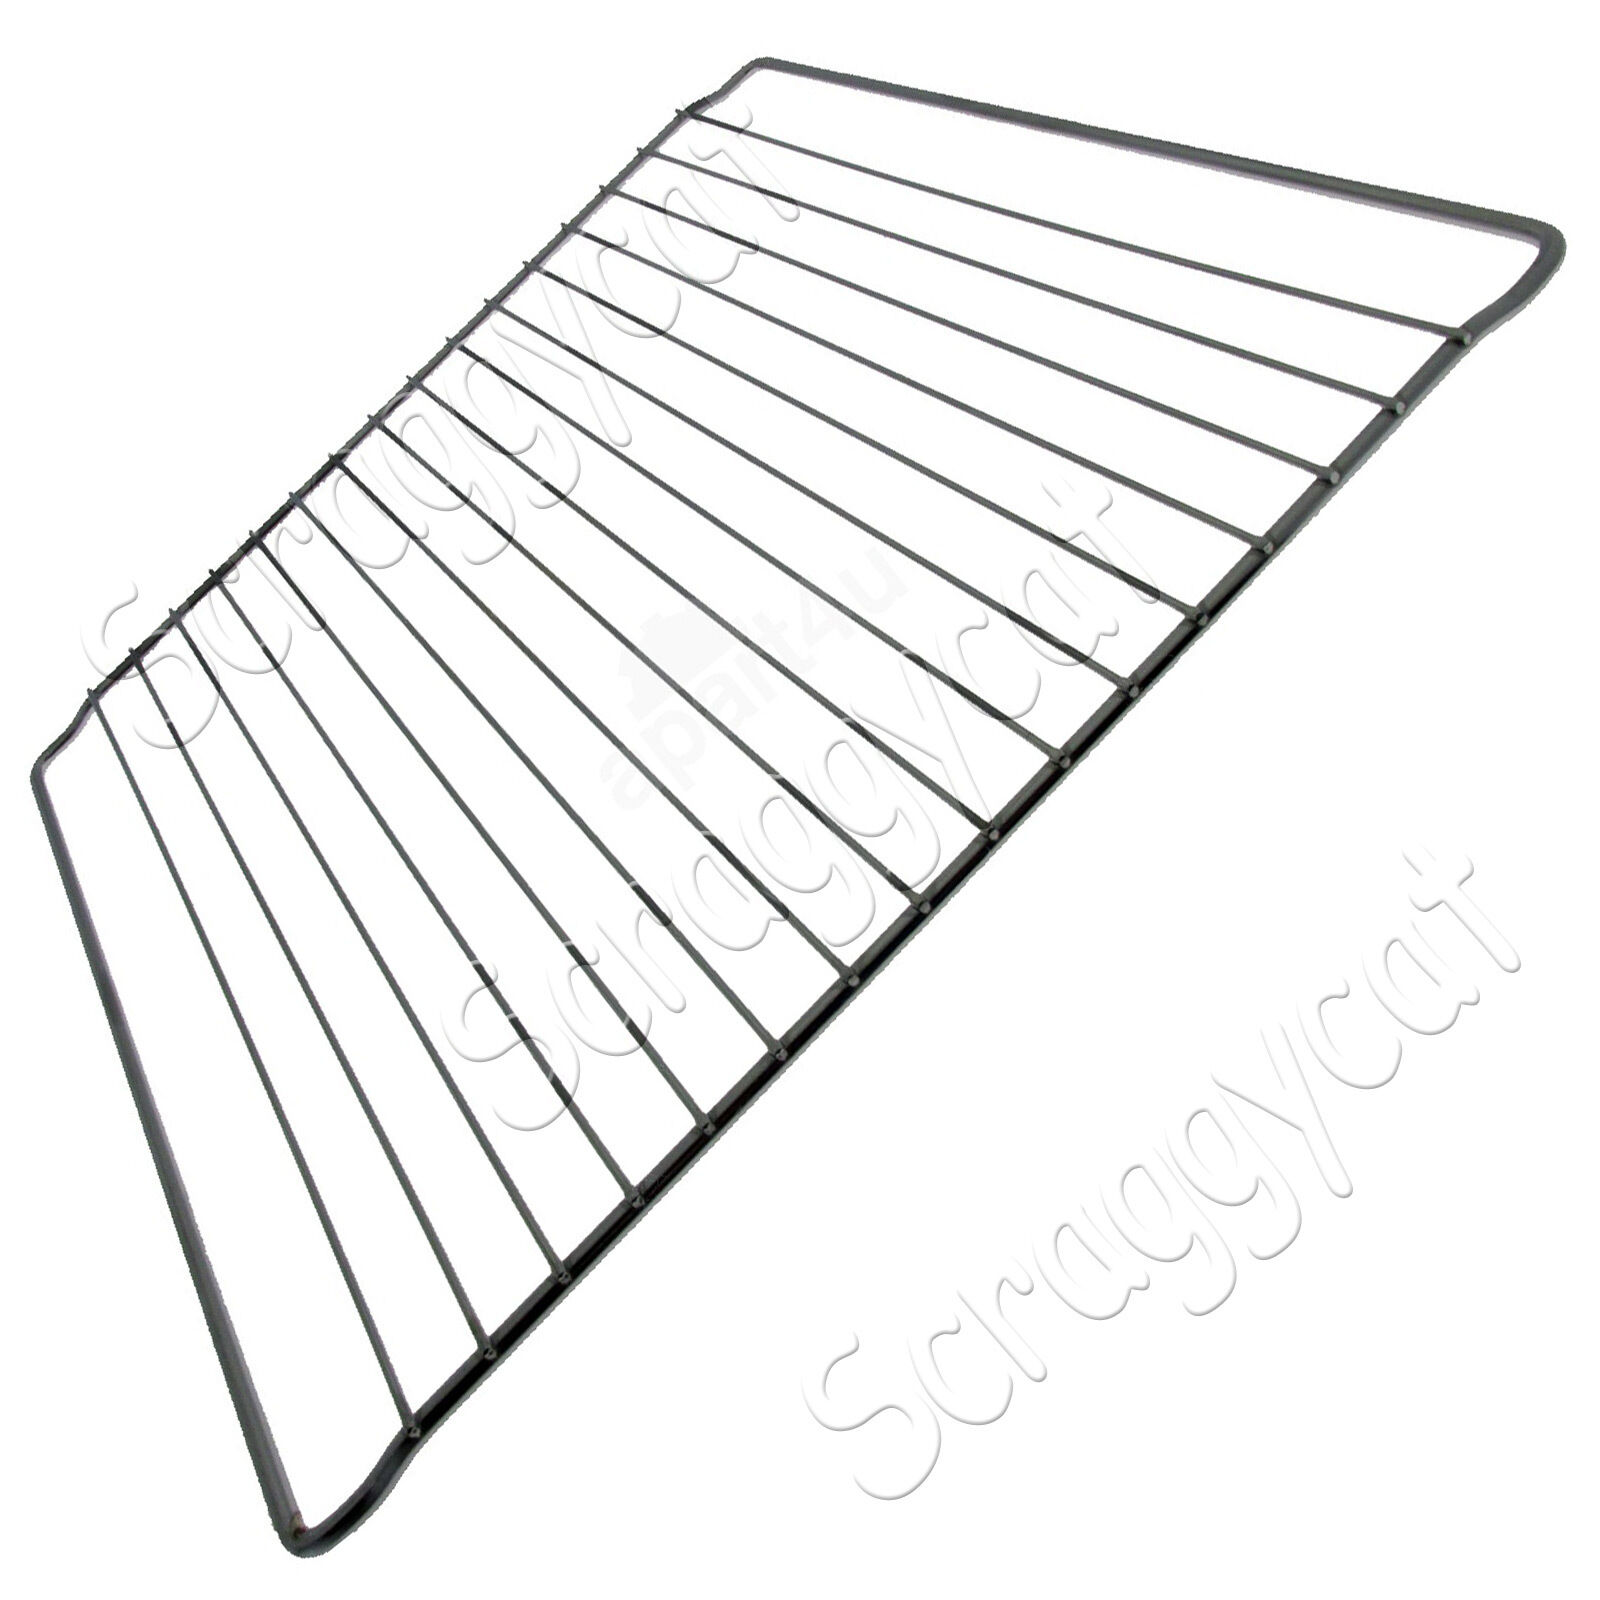 Grill Rack Shelf 365Mmx397Mm for Flavel Oven Equivalent to 440100001 